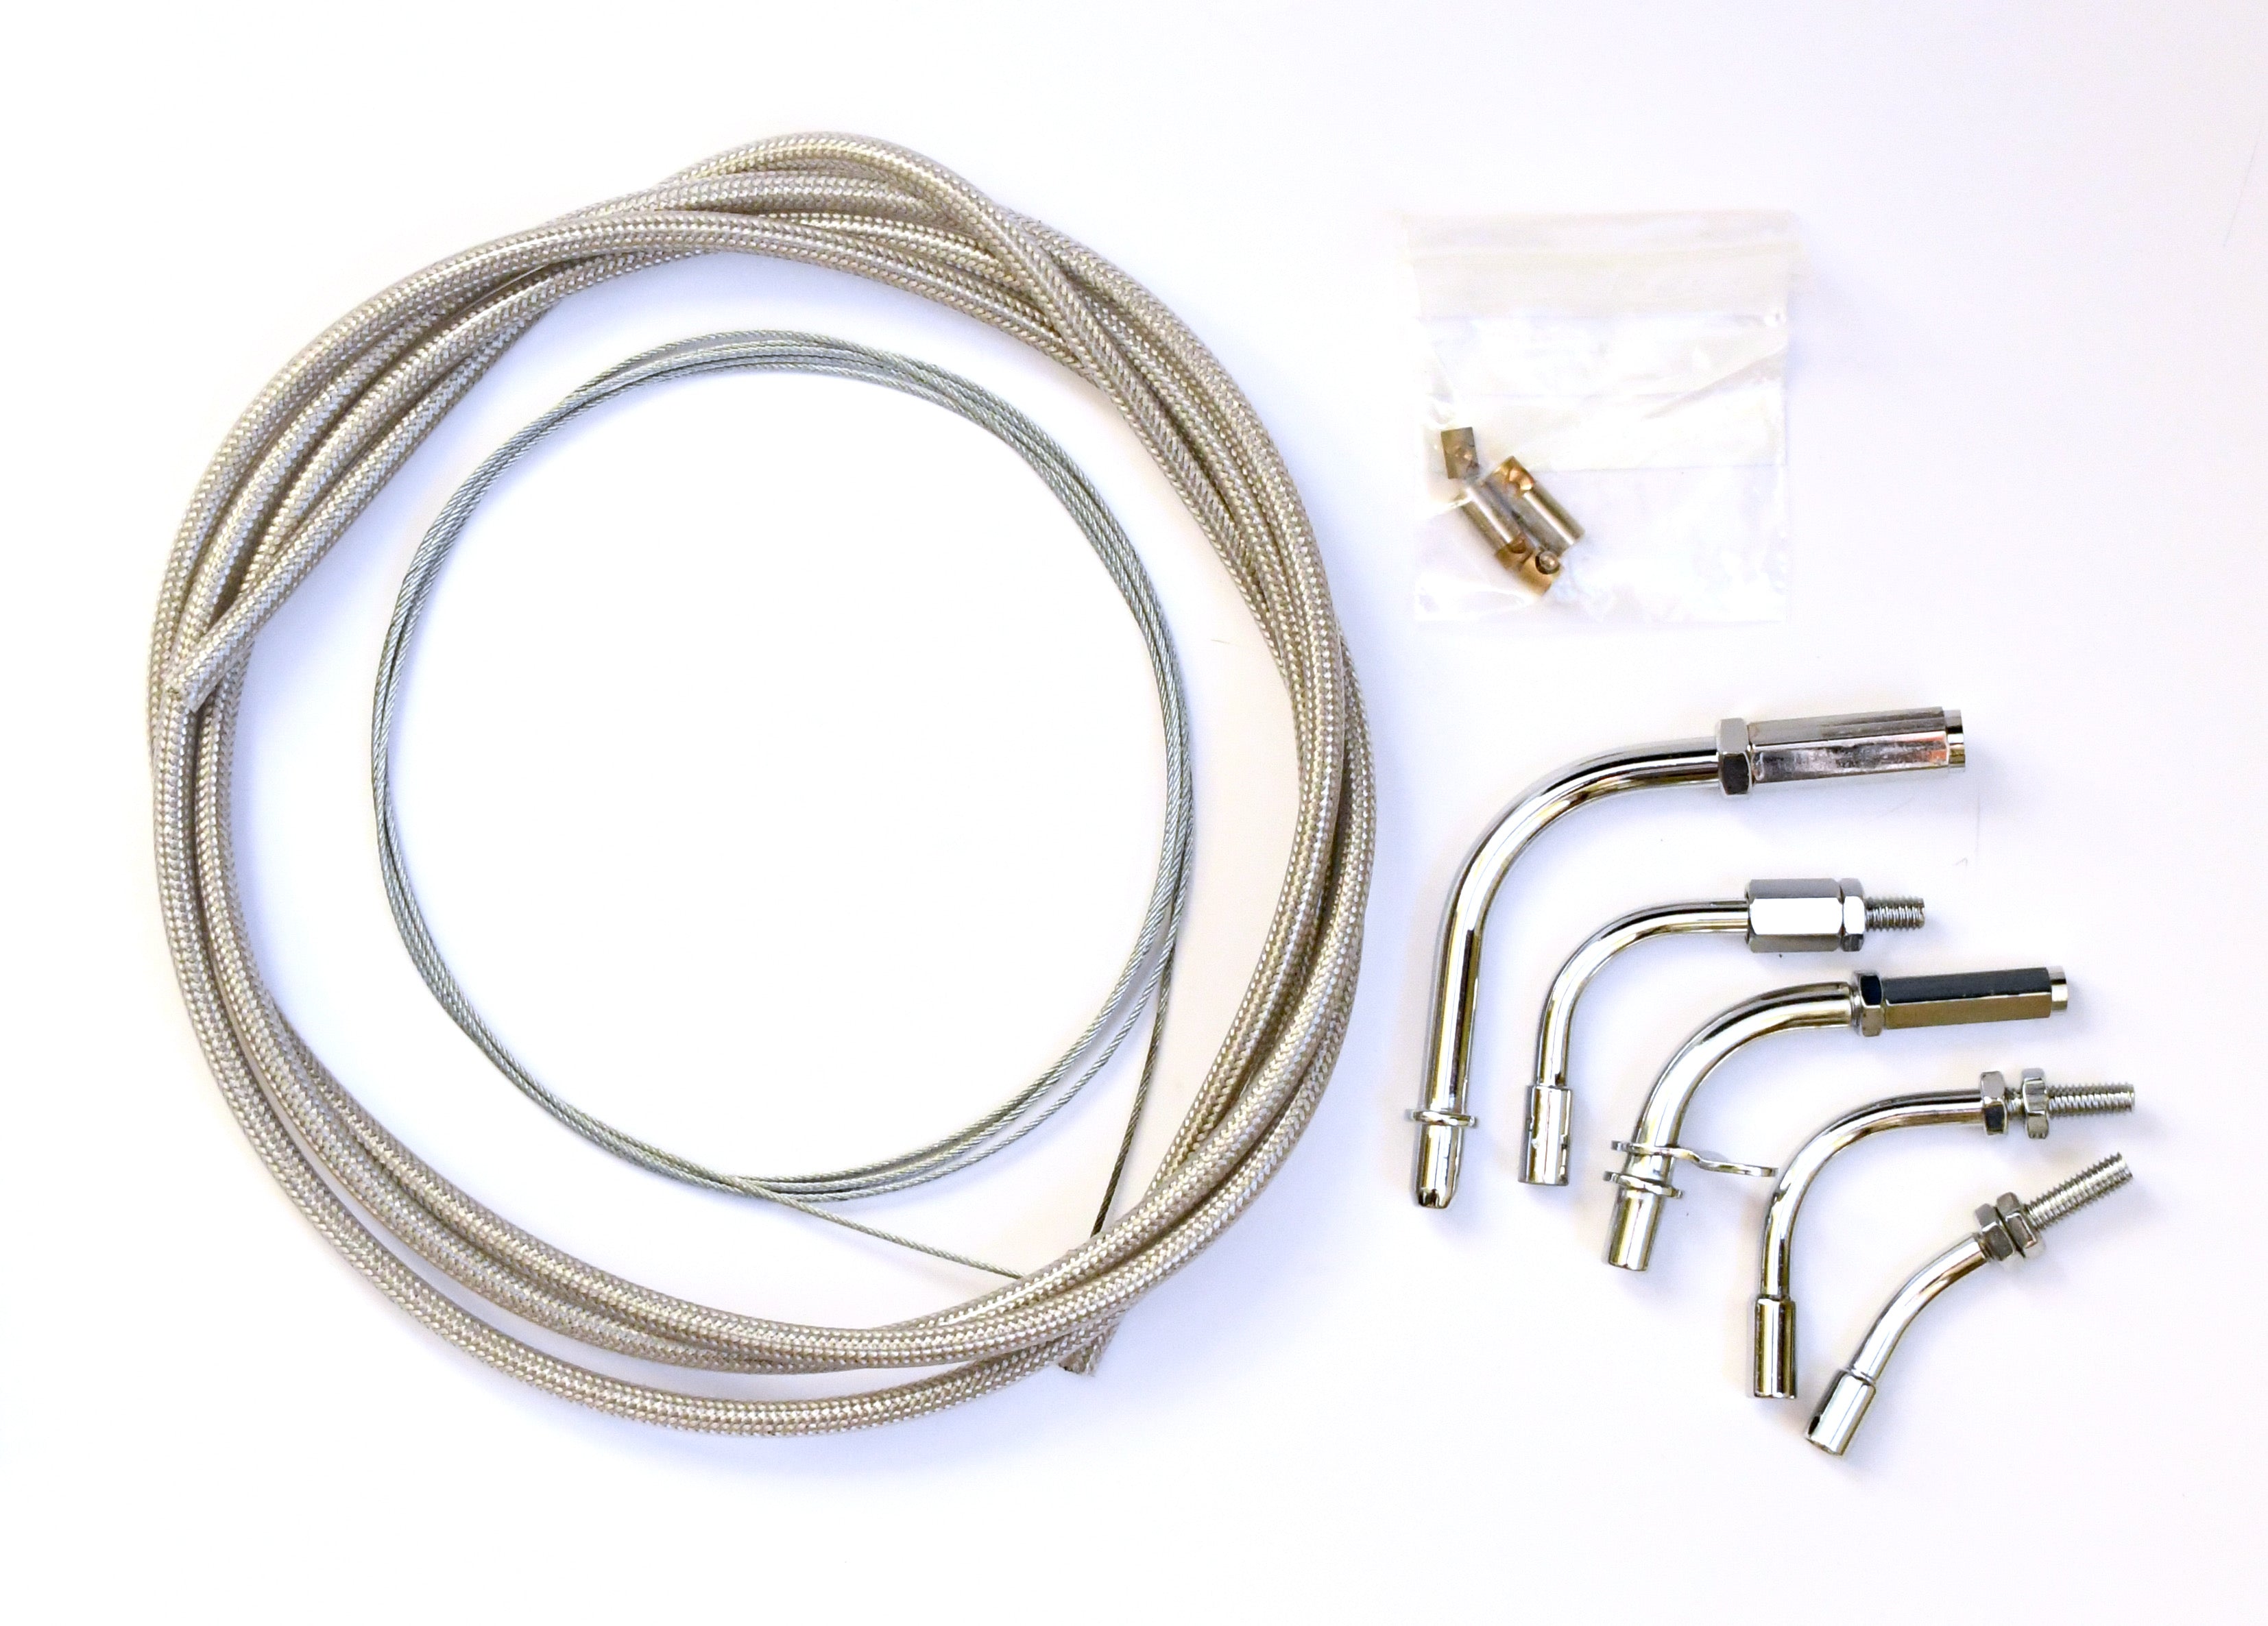 Venhill Braided Universal Single Throttle Cable Kit - 6mm - 2m